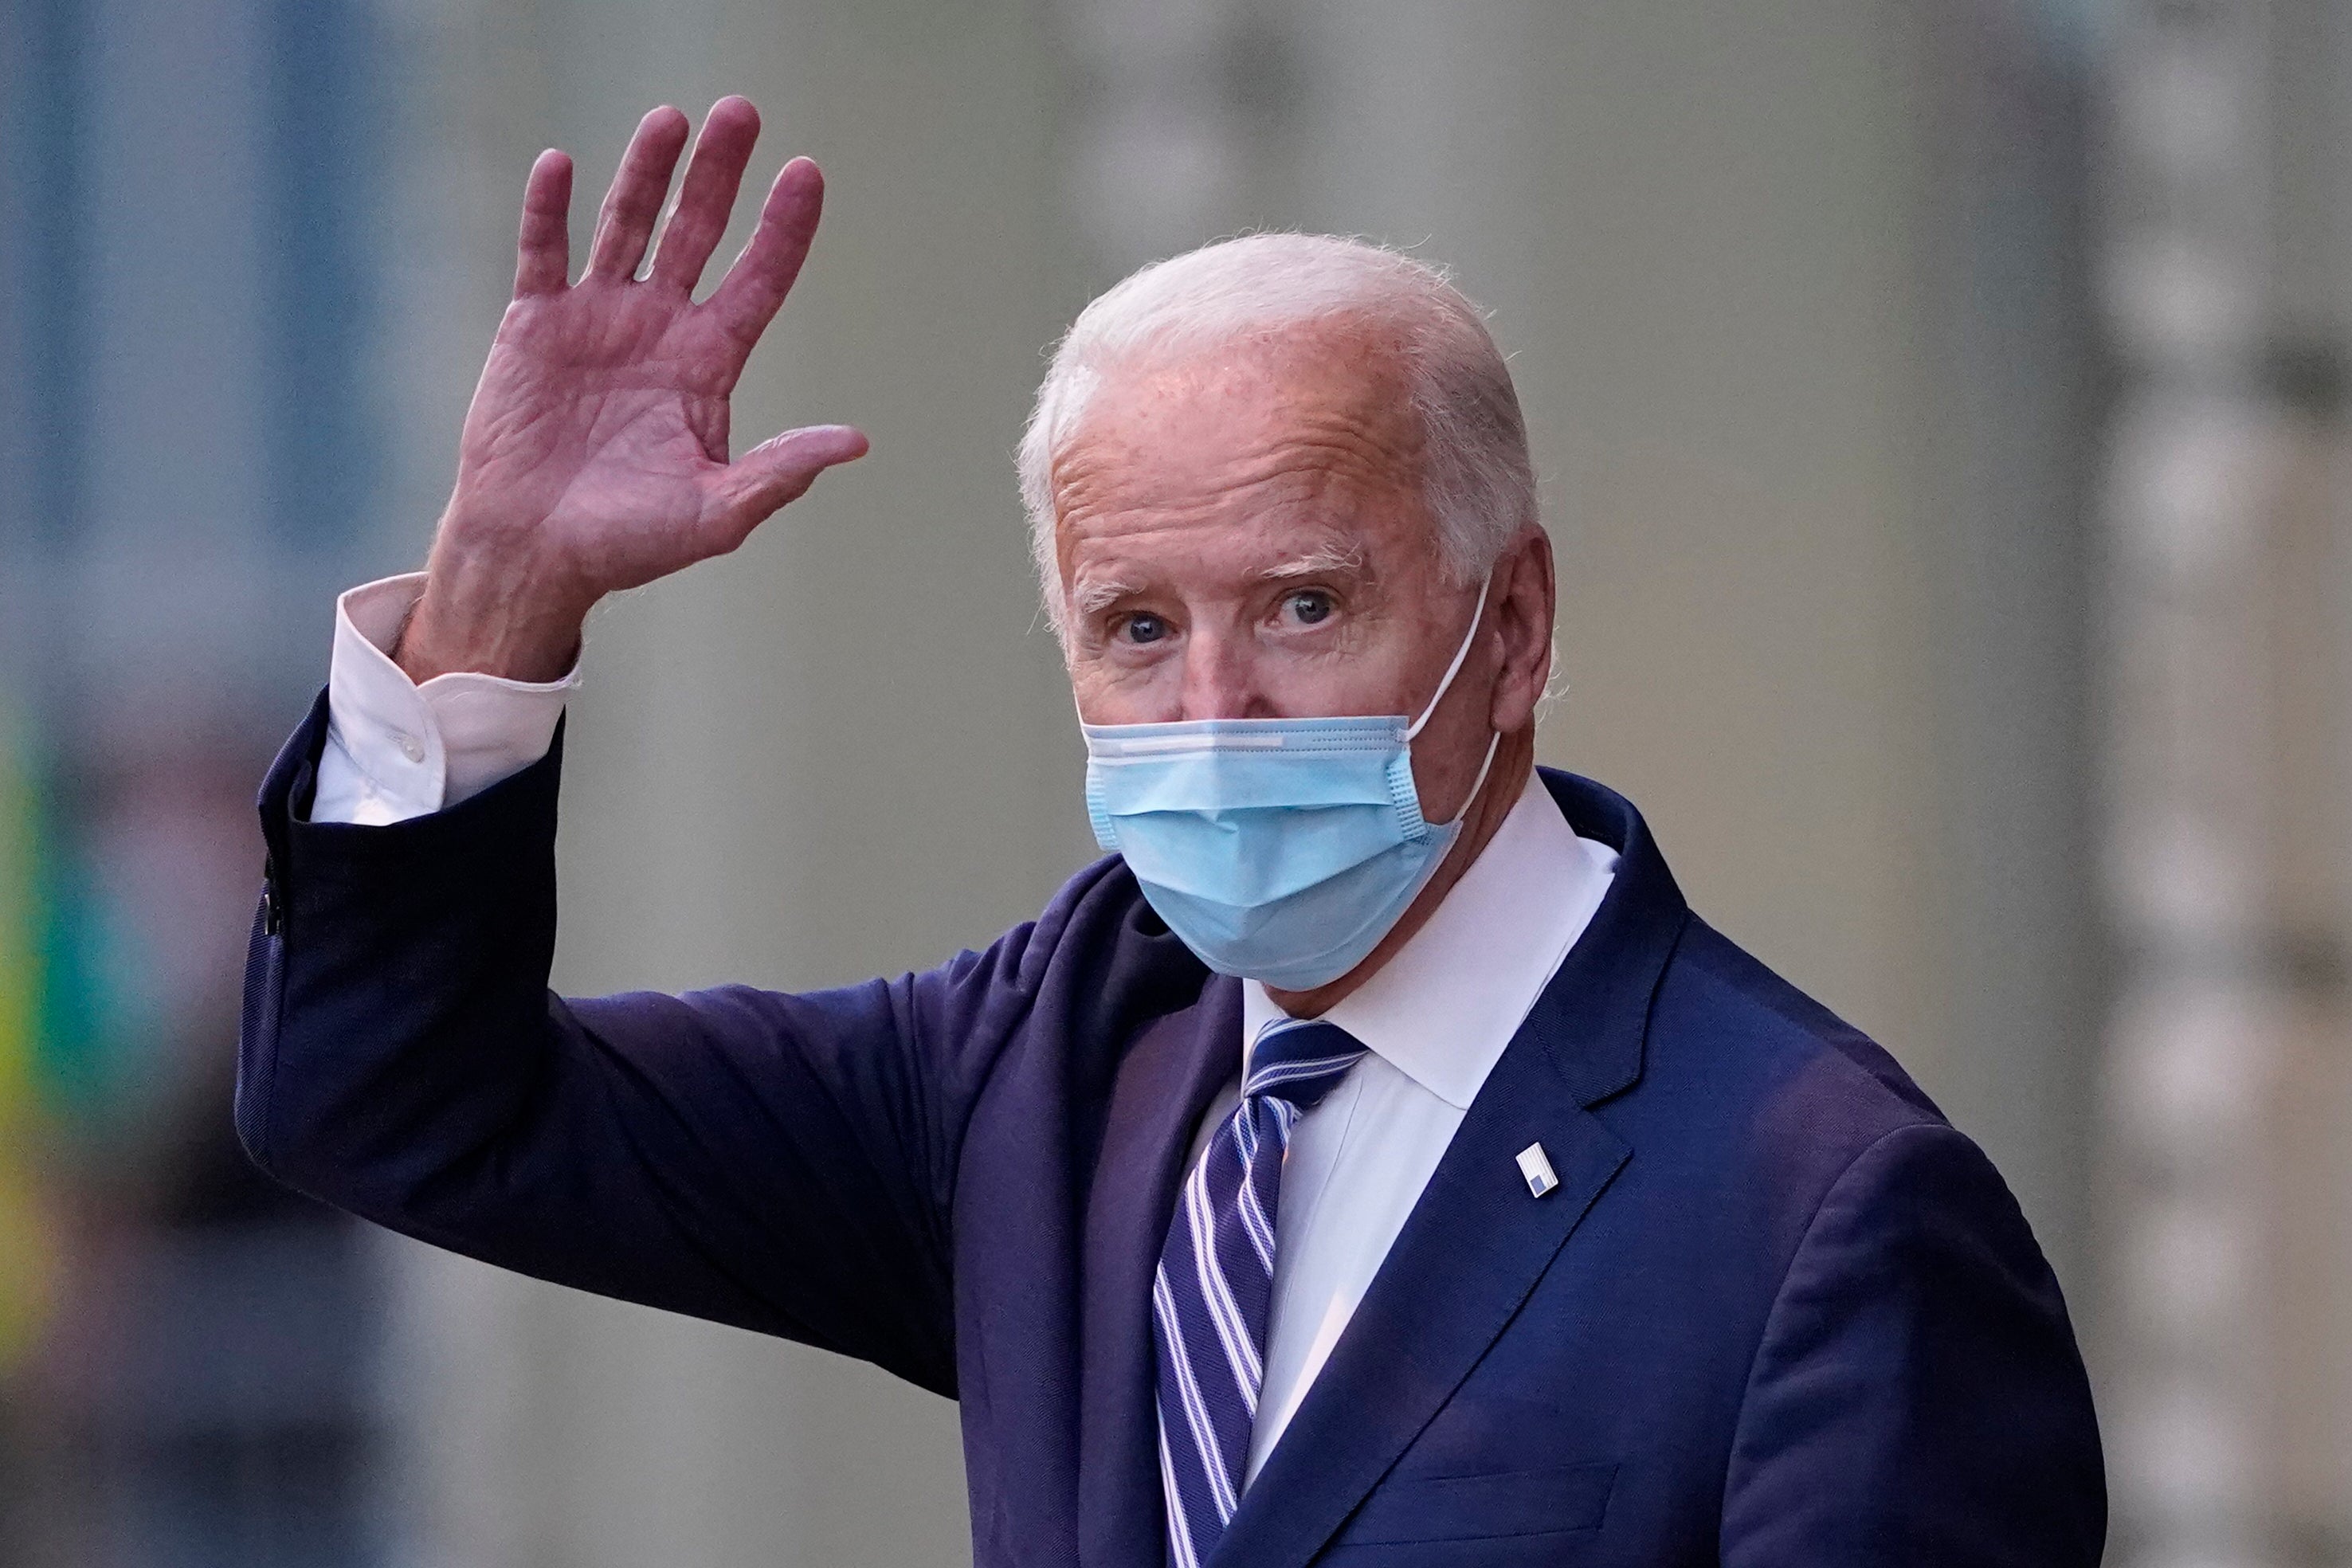 President-elect Joe Biden is still not getting the PDB, America’s most sensitive security briefing, like other incoming presidents. That’s up to Donald Trump.